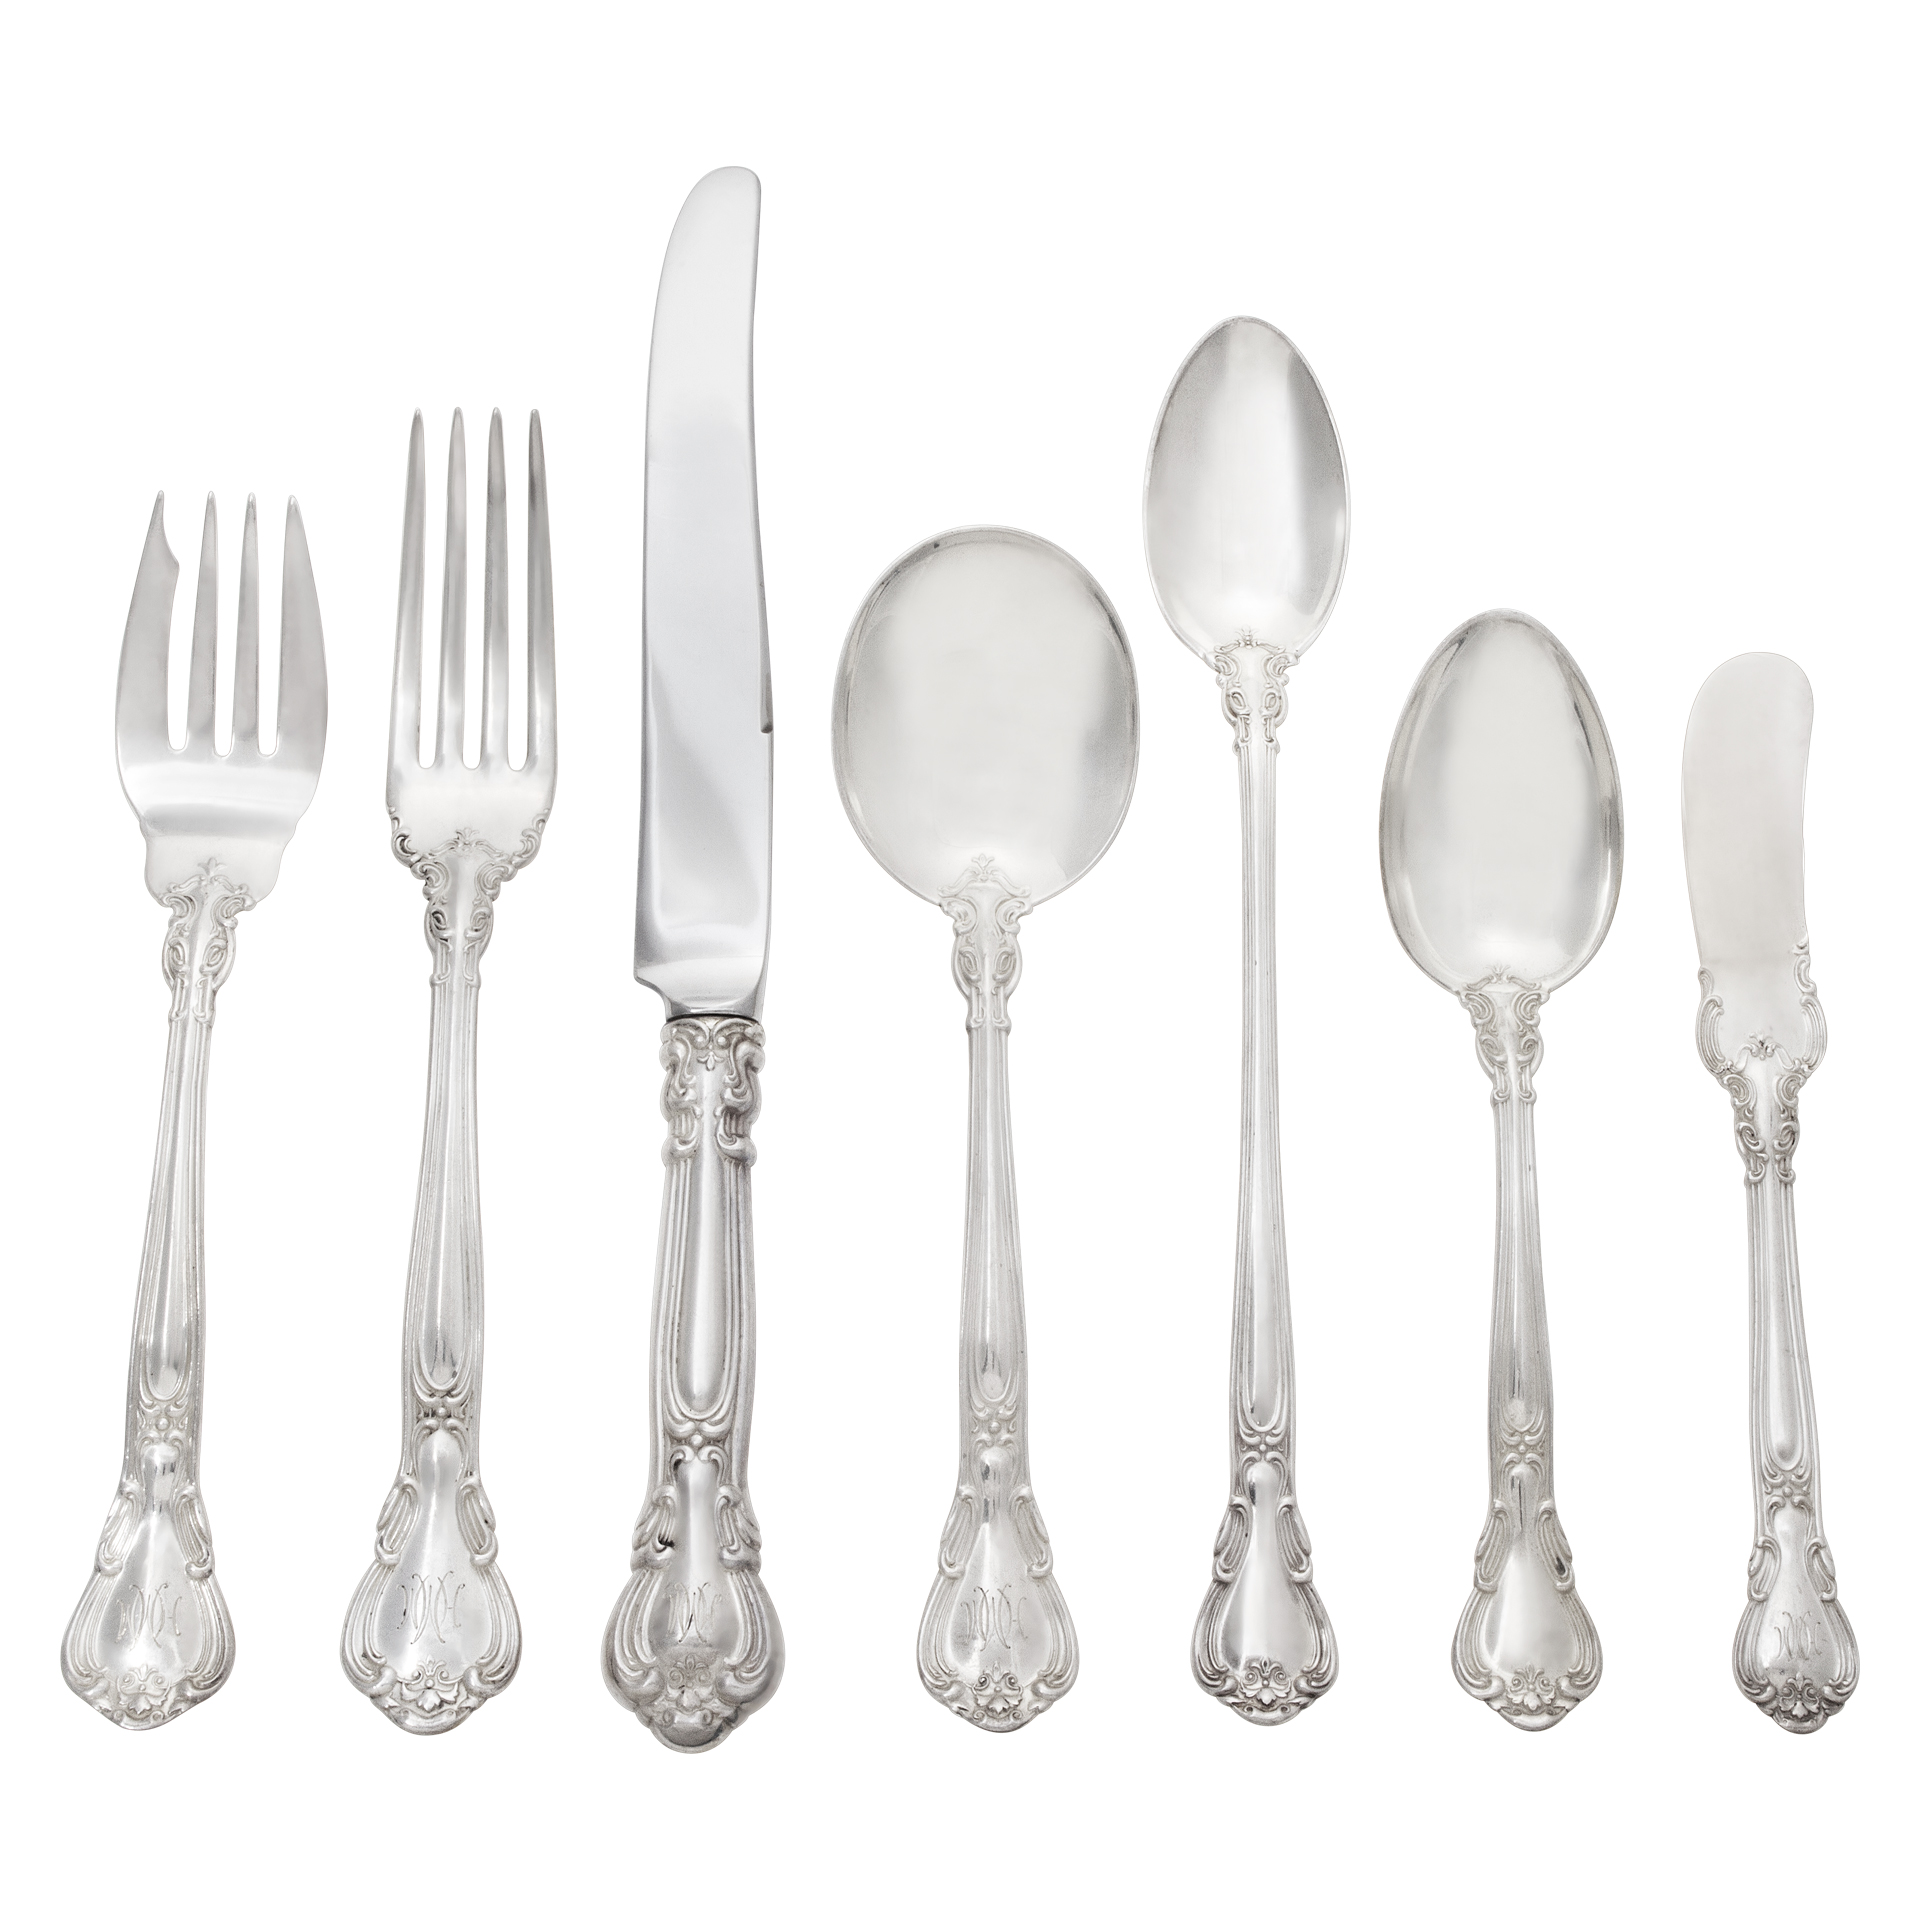 CHANTILLY sterling silver flatware set patented in 1895 by Gorham- 96 TOTAL PIECES- 7 Place Setting for 10 w/ 13 Serving pieces.